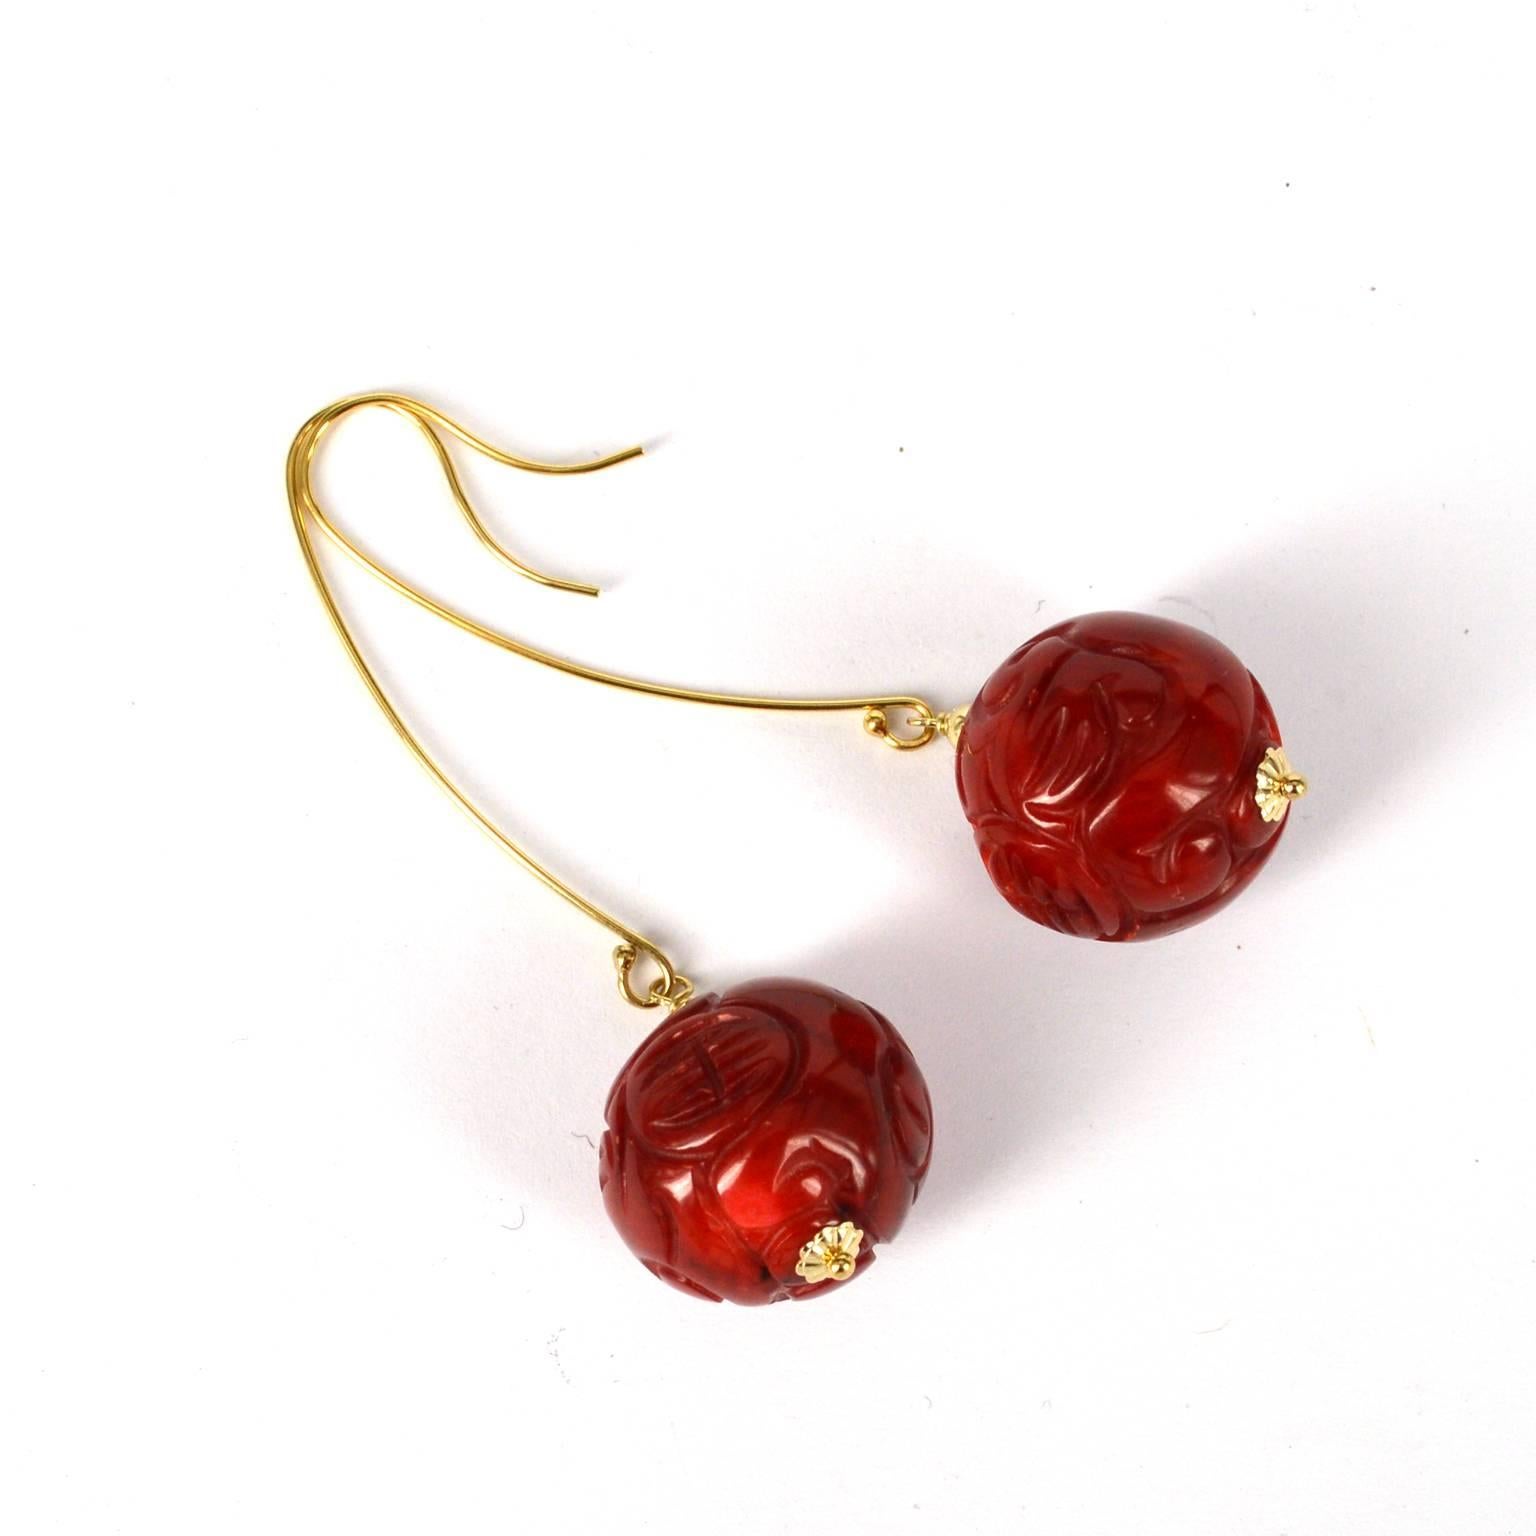 Carved Sea Bamboo Coral bead dyed red, each bead is 18mm in size.
14k gold filled sheppard measures 40mm.
Total length of earring is 65mm with each earring weighing 8.1g.